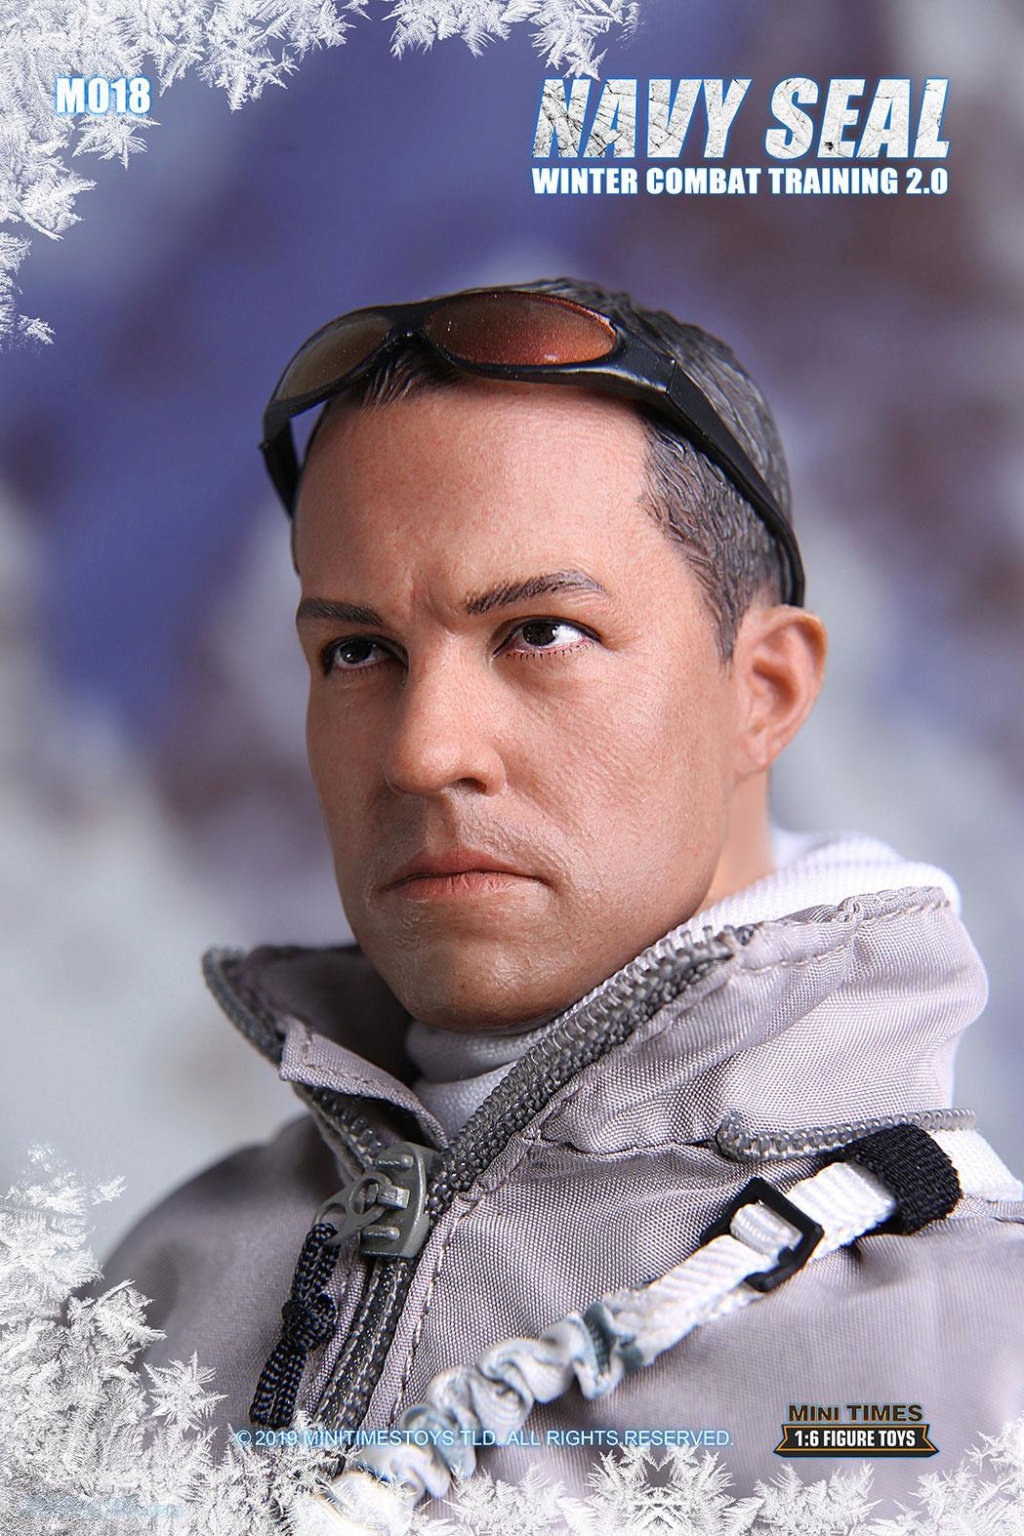 modernmilitary - NEW PRODUCT: Mini-Times: 1/6 scale Navy Seal Winter Combat Training 2.0 92720130